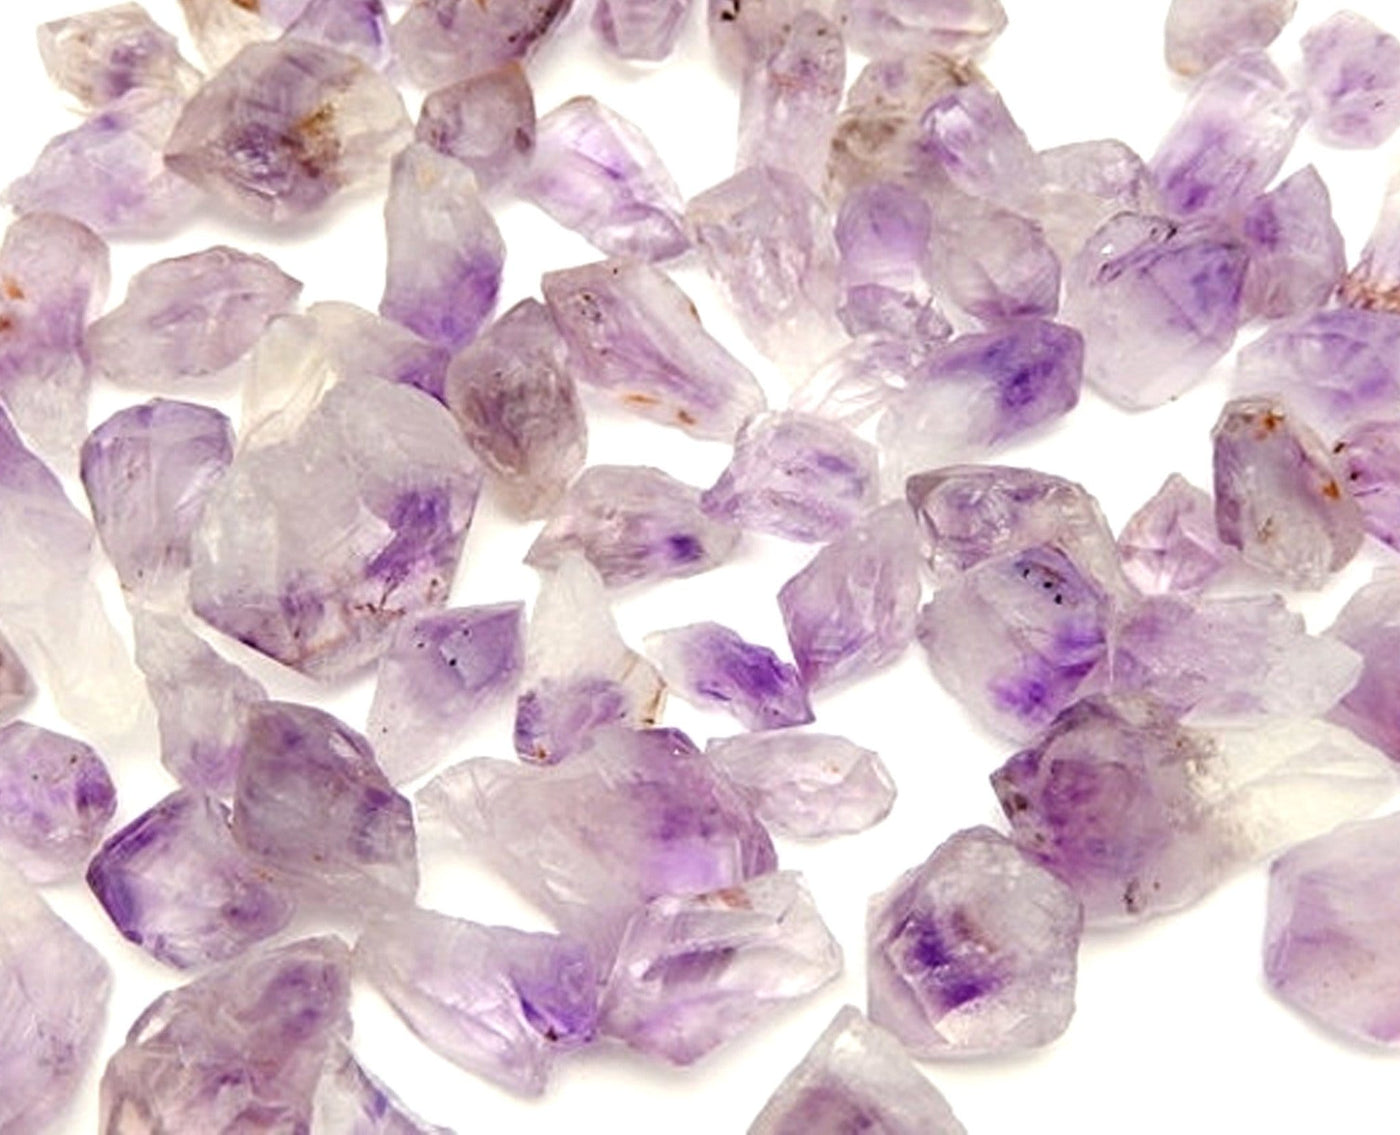 Raw Amethyst Points scattered on white background